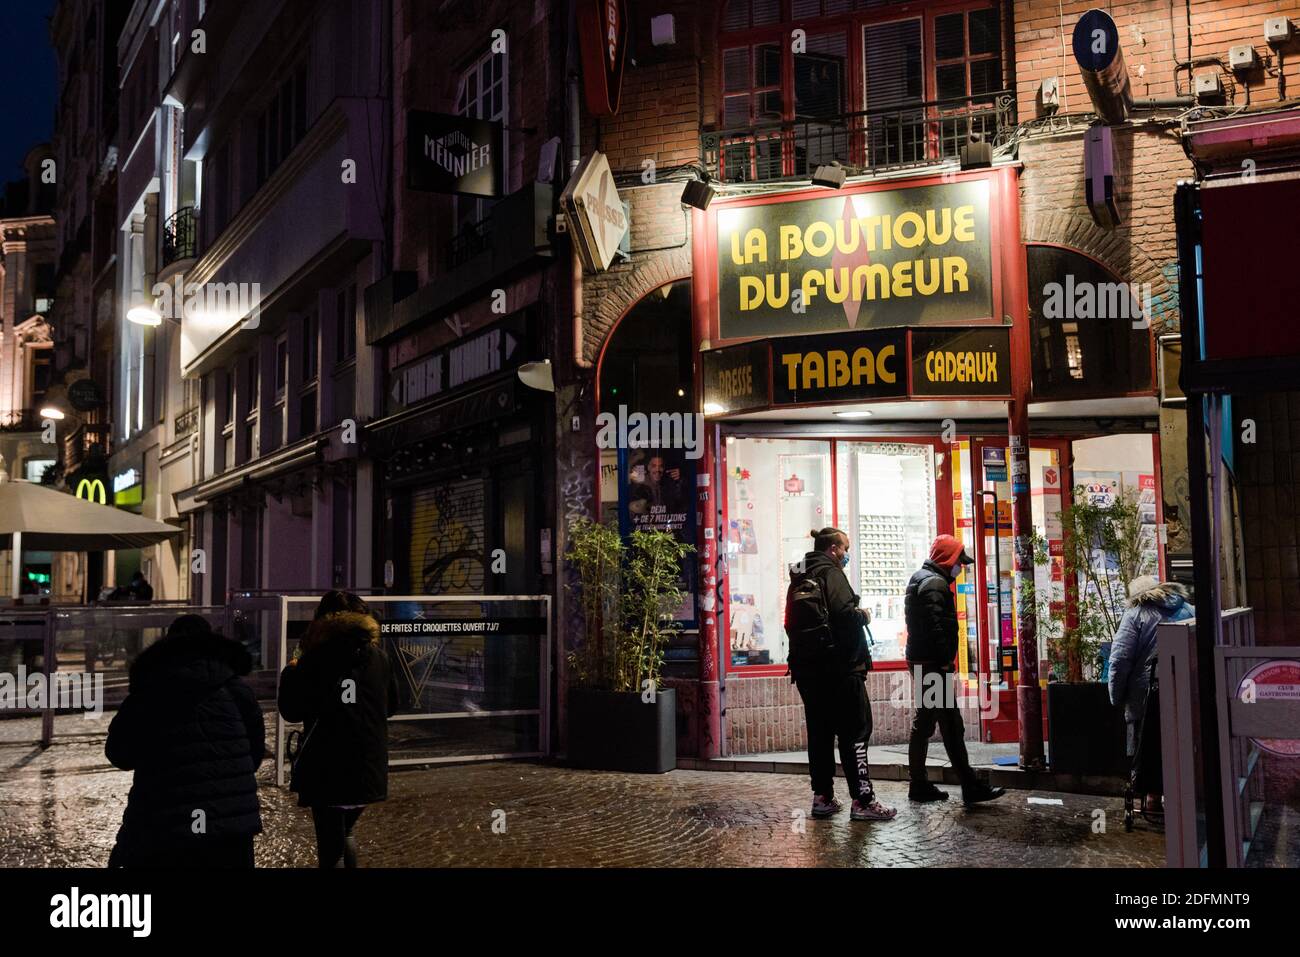 Oeple wait in front of a tobacco shop during a lockdown to curb the spread  of Covid-19 in Lille, France, on November 23, 2020. Photo by Julie  Sebadelha/ABACAPRESS.COM Stock Photo - Alamy